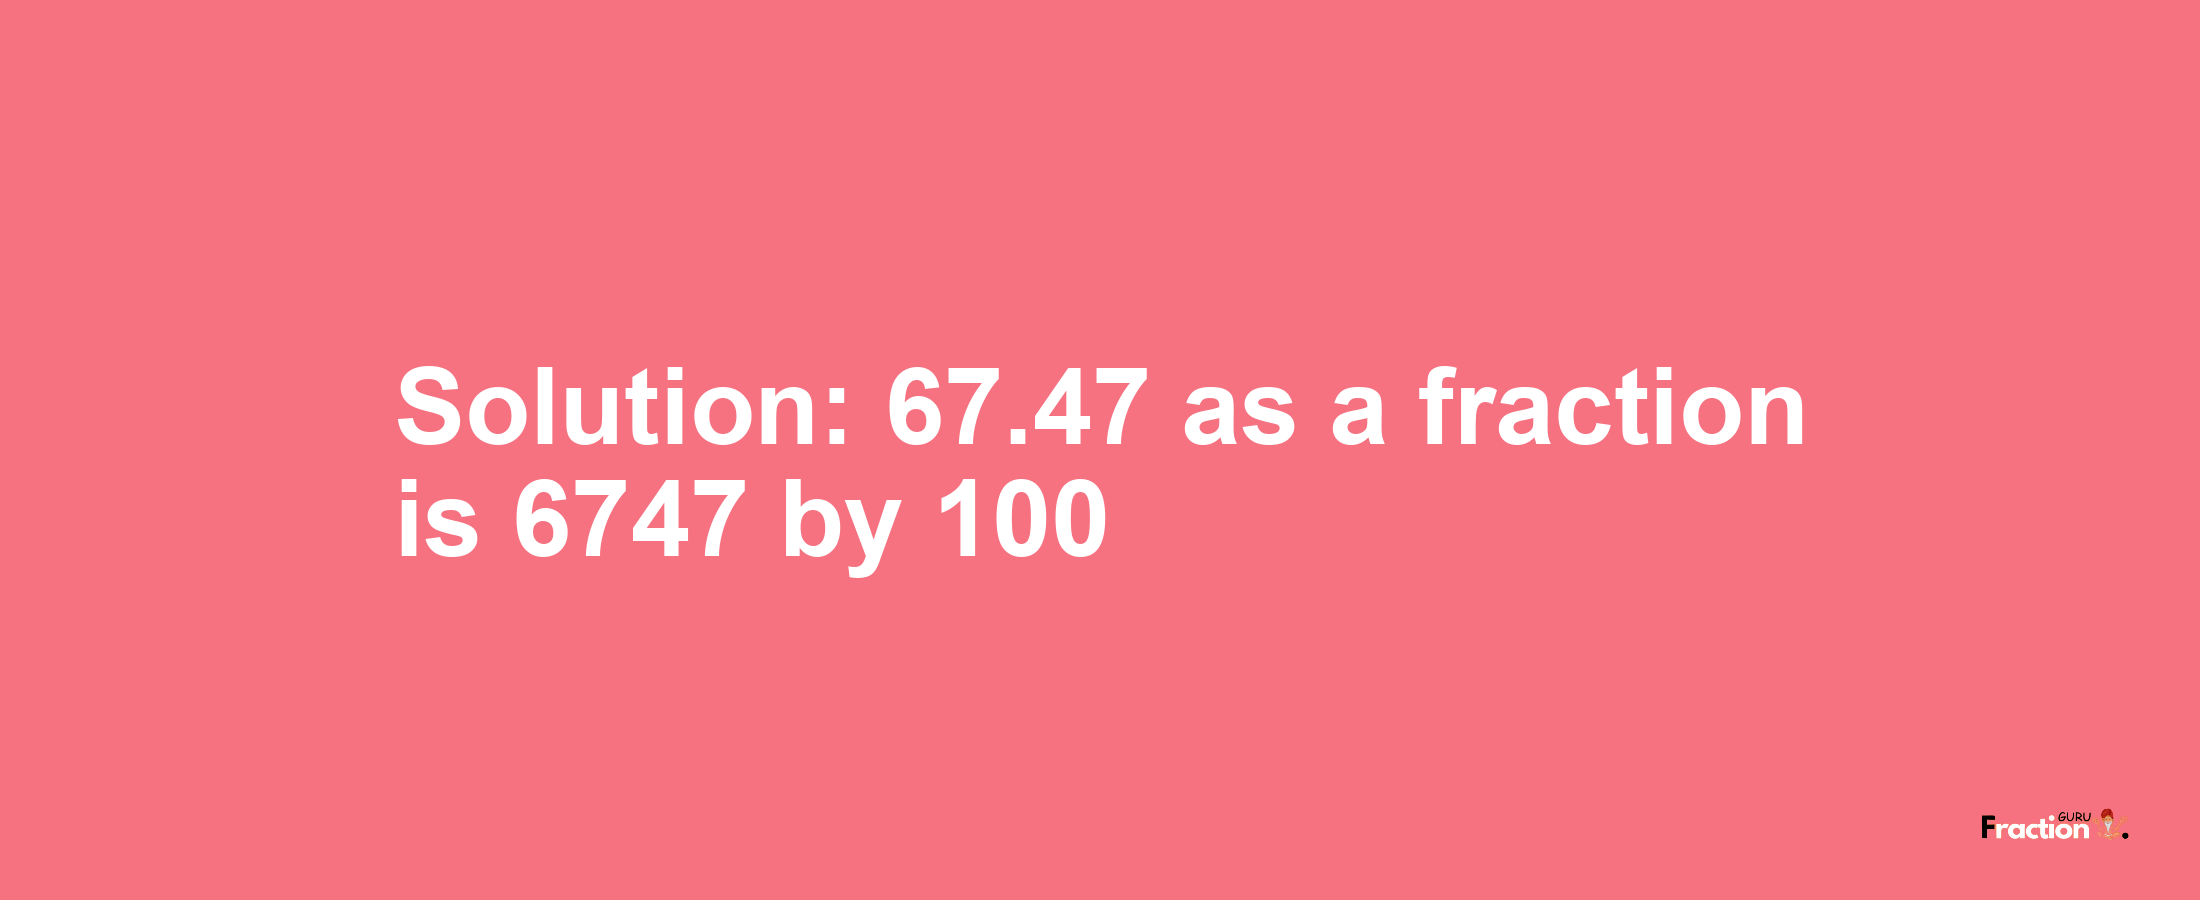 Solution:67.47 as a fraction is 6747/100